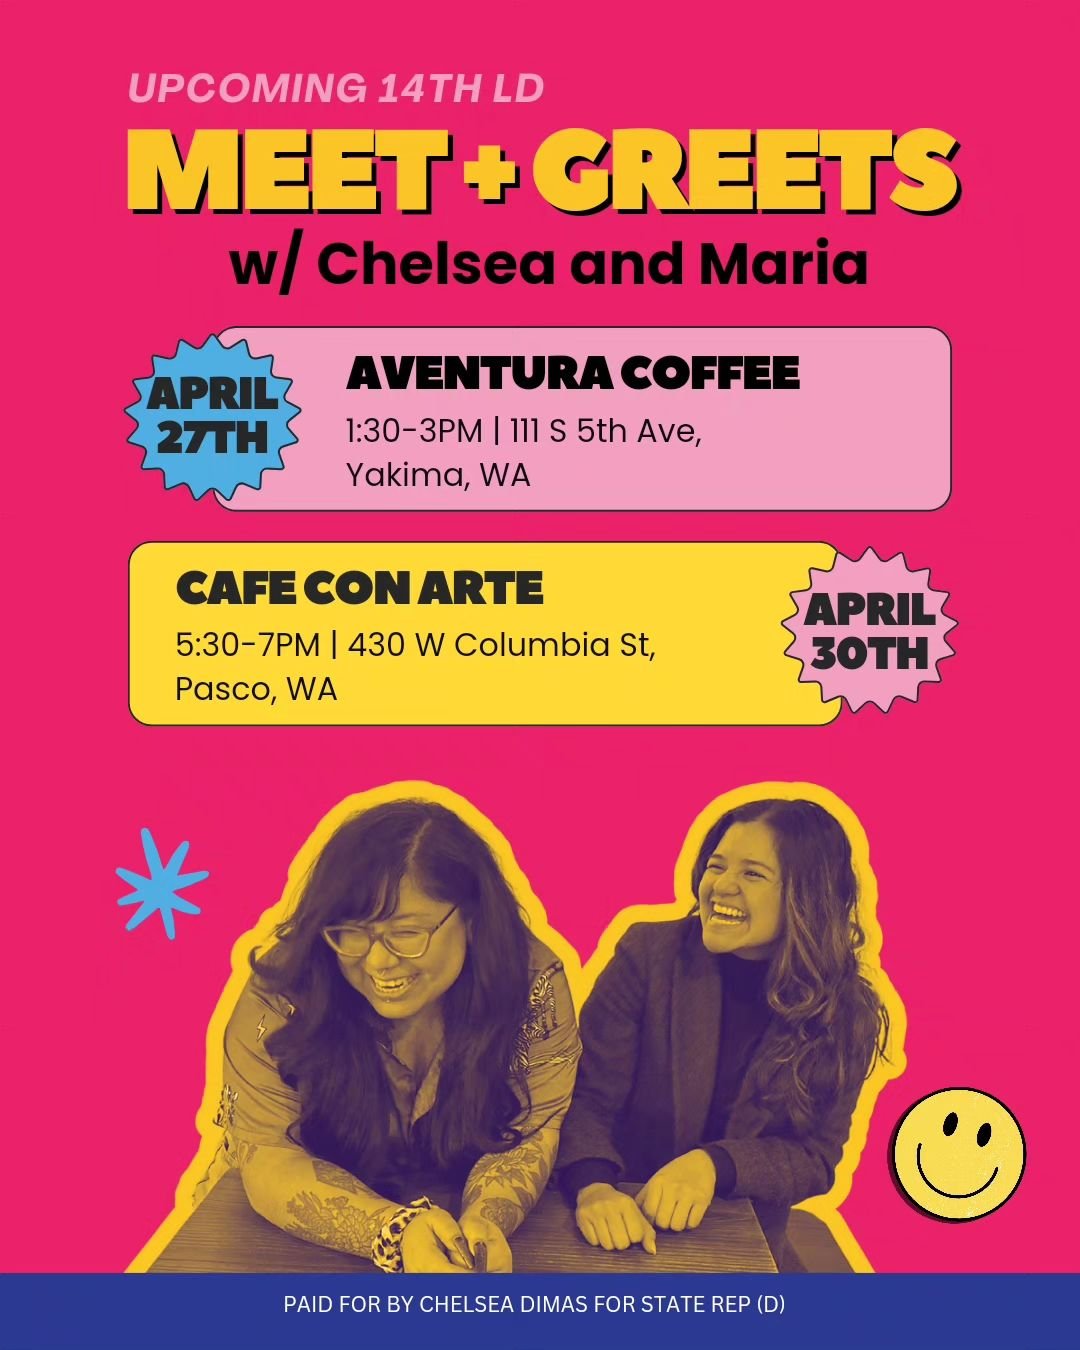 EVENT ALERT‼️ Ayyyy, your favorite duo is back at it again with more Meet + Greets! This time, we're stopping in Yakima and Pasco! Here are the deets:

✨️Saturday, April 27th | 1:30-3pm at Aventura Coffee in Yakima
✨️Tuesday, April 30th | 5:30-7pm at